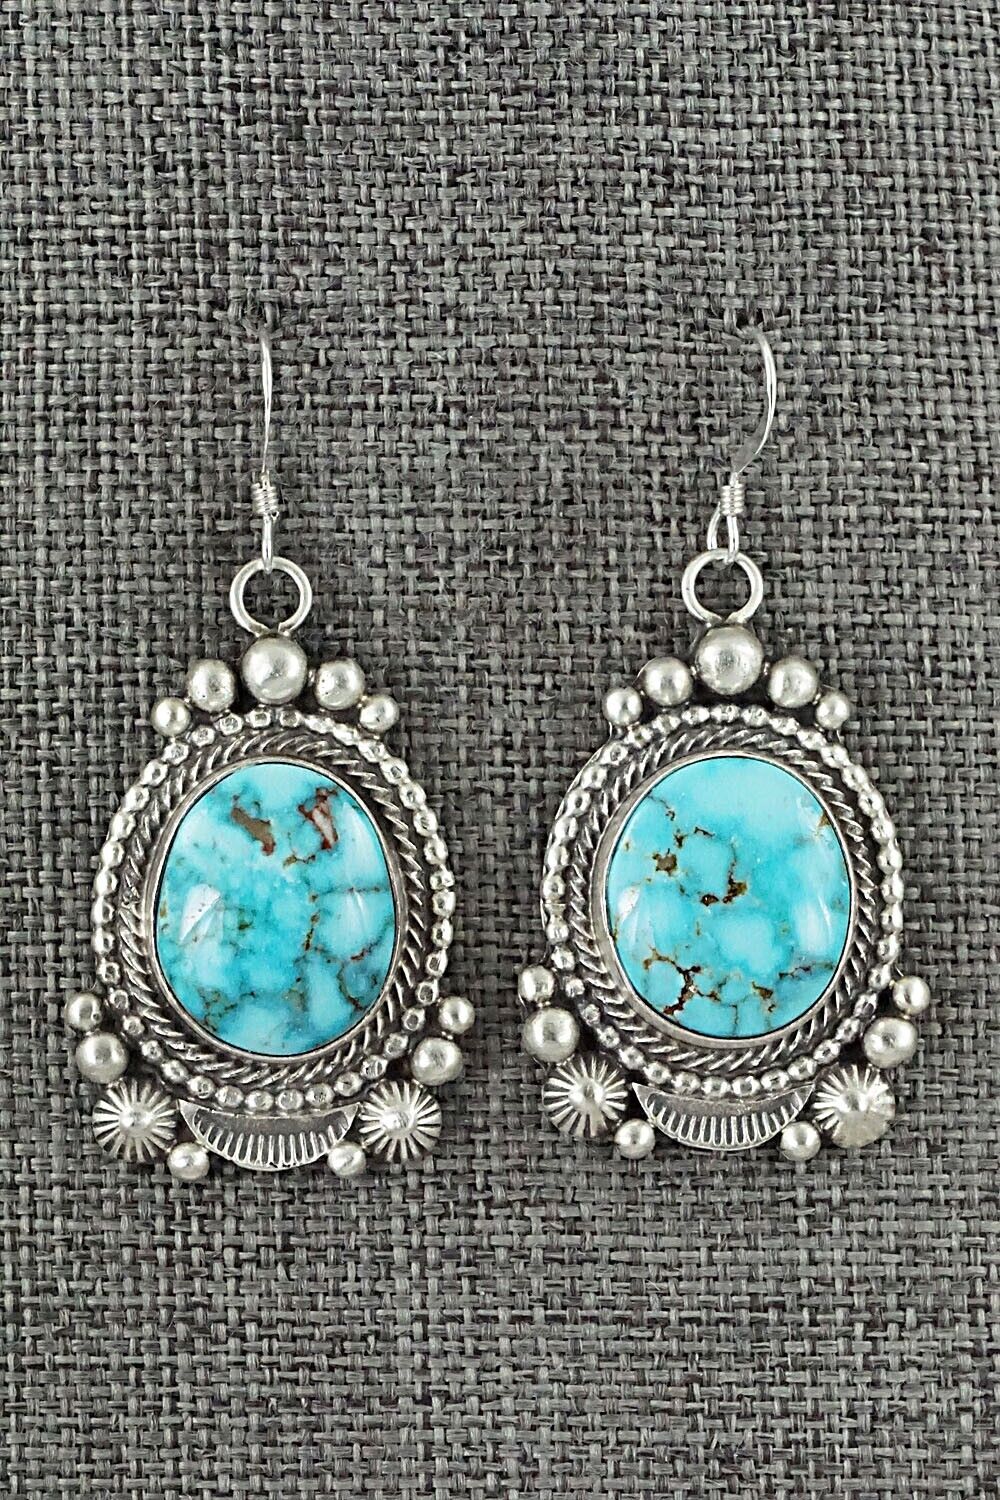 Turquoise & Sterling Silver Necklace and Earrings Set - Tom Lewis